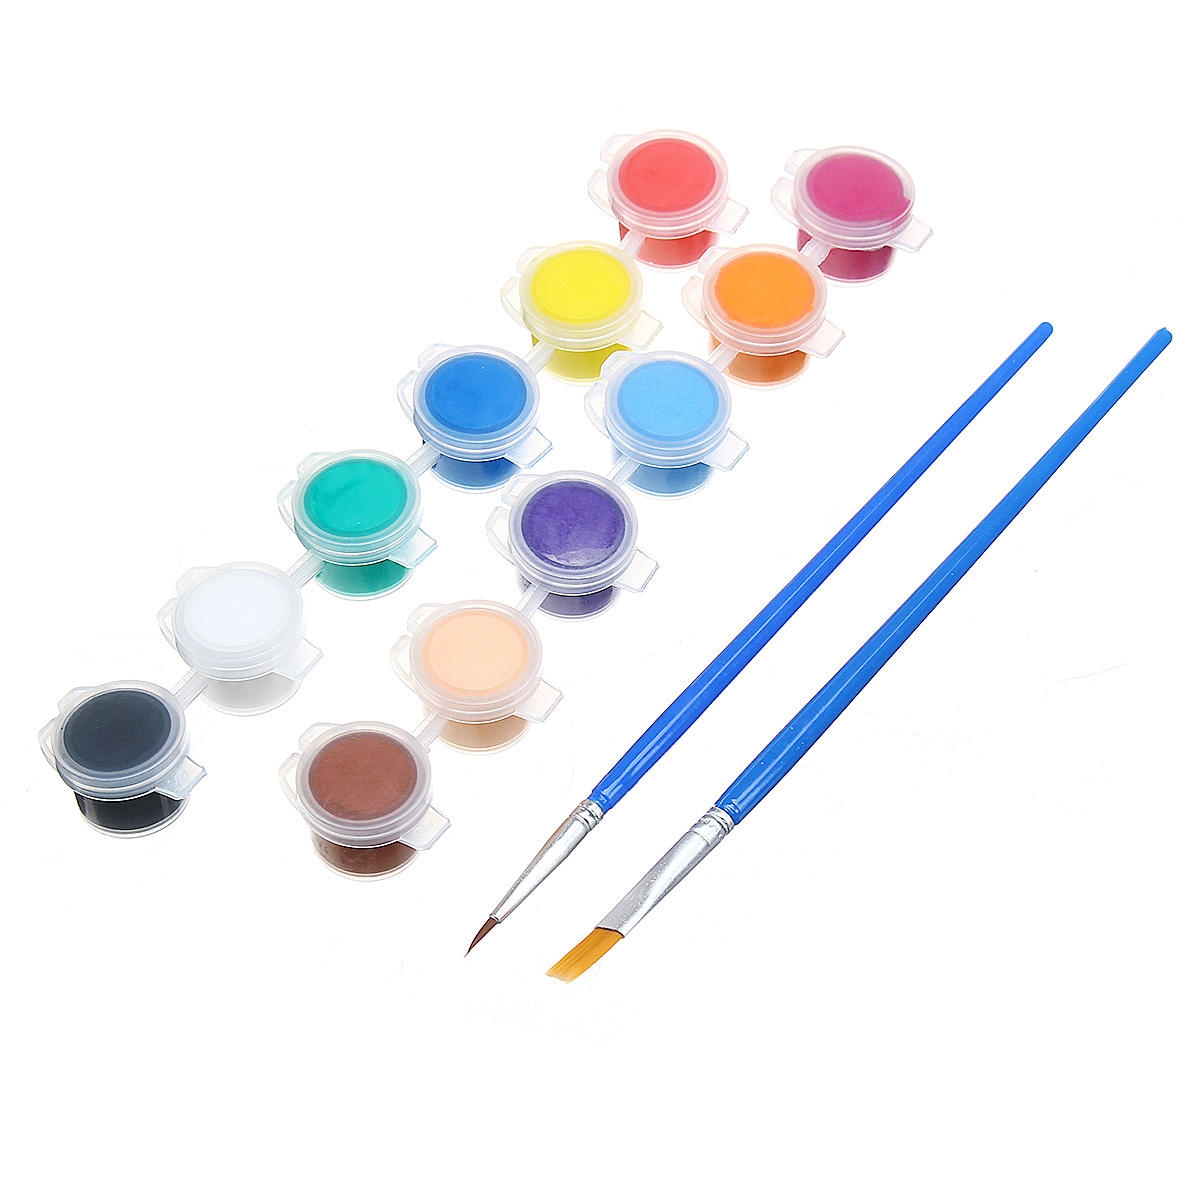 New 12 Colors Art DIY 3ML Watercolor Acrylic Pigment Painting Drawing ...